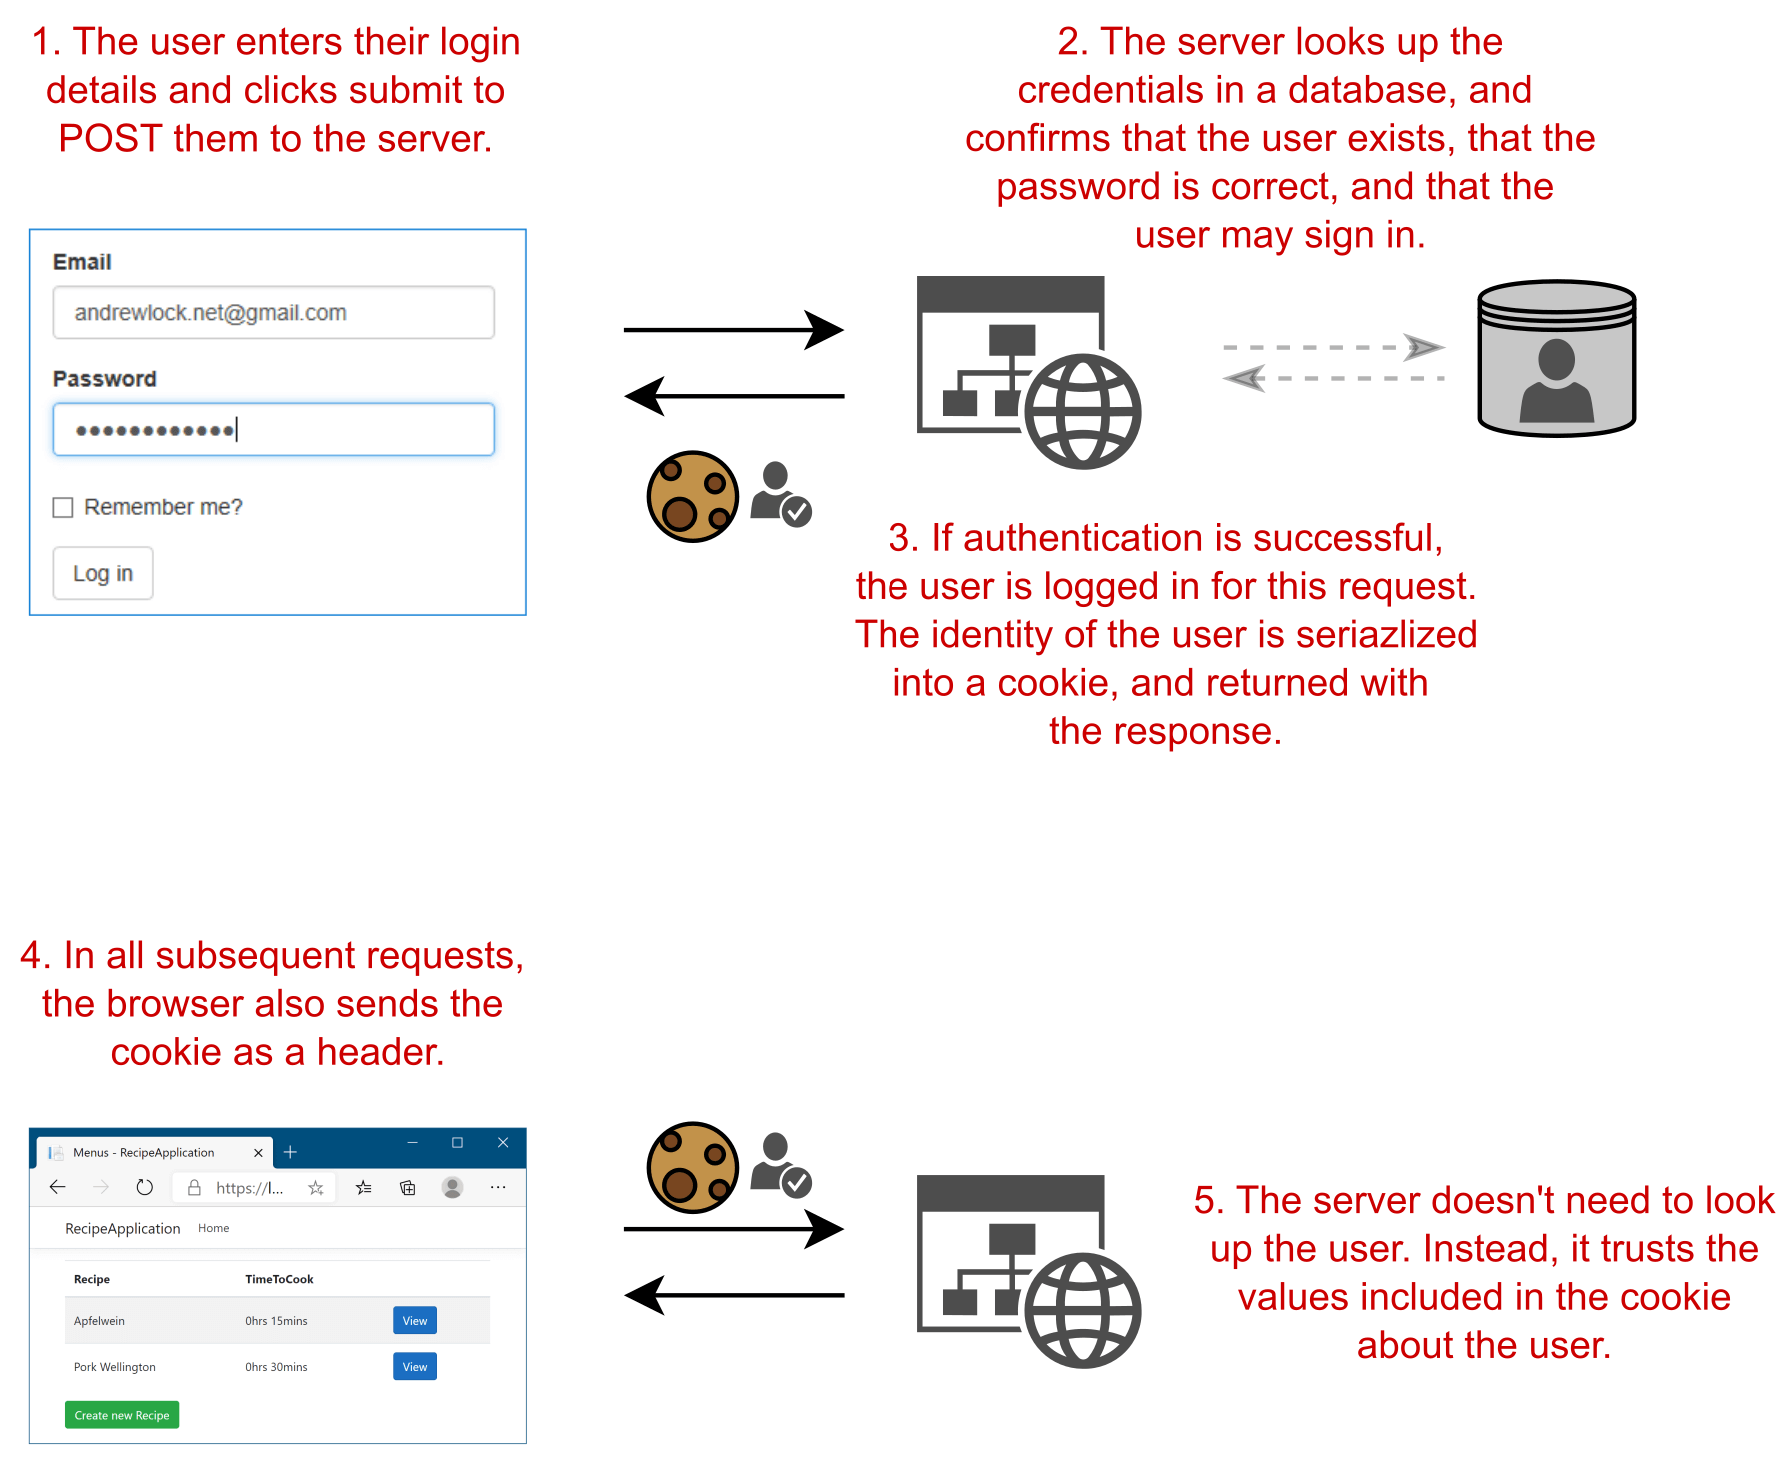 Image showing using a cookie to persist the authentication state between requests